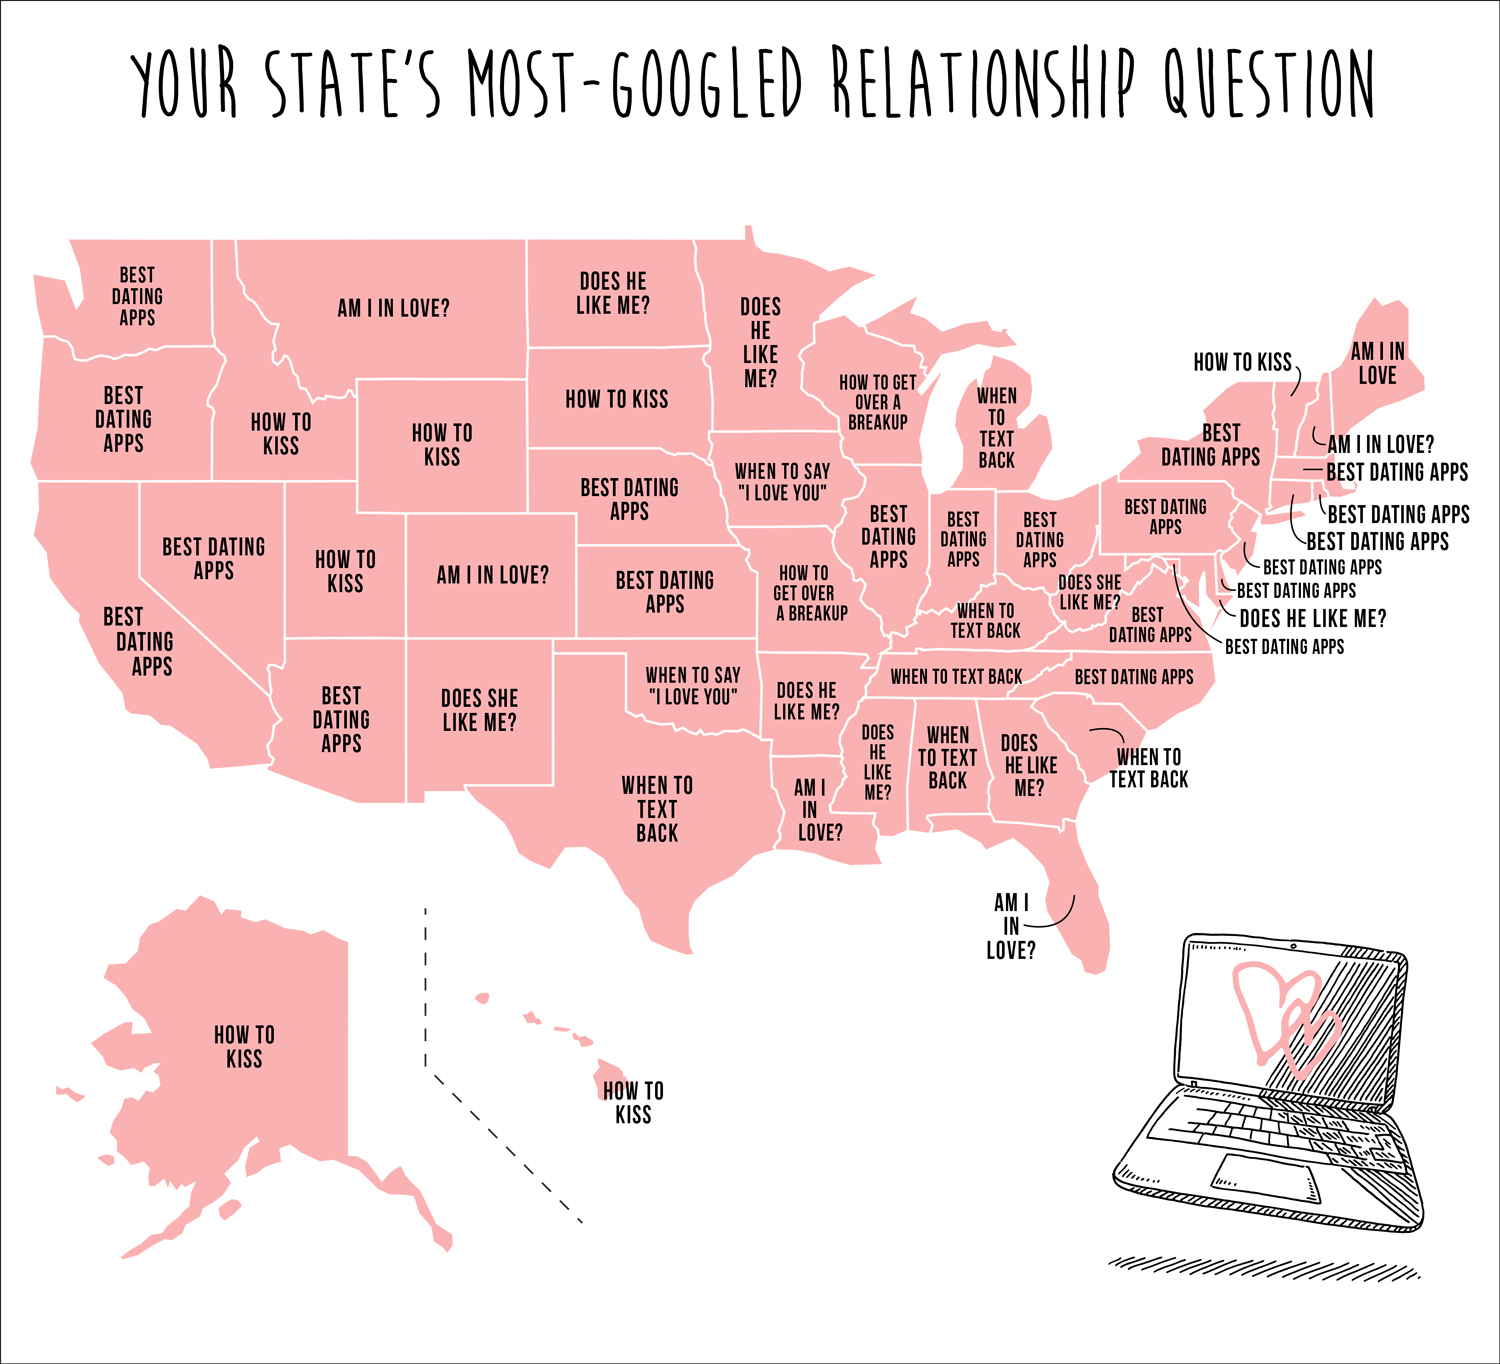 Most-Googled-Relationship-Questions-3.0_MAP